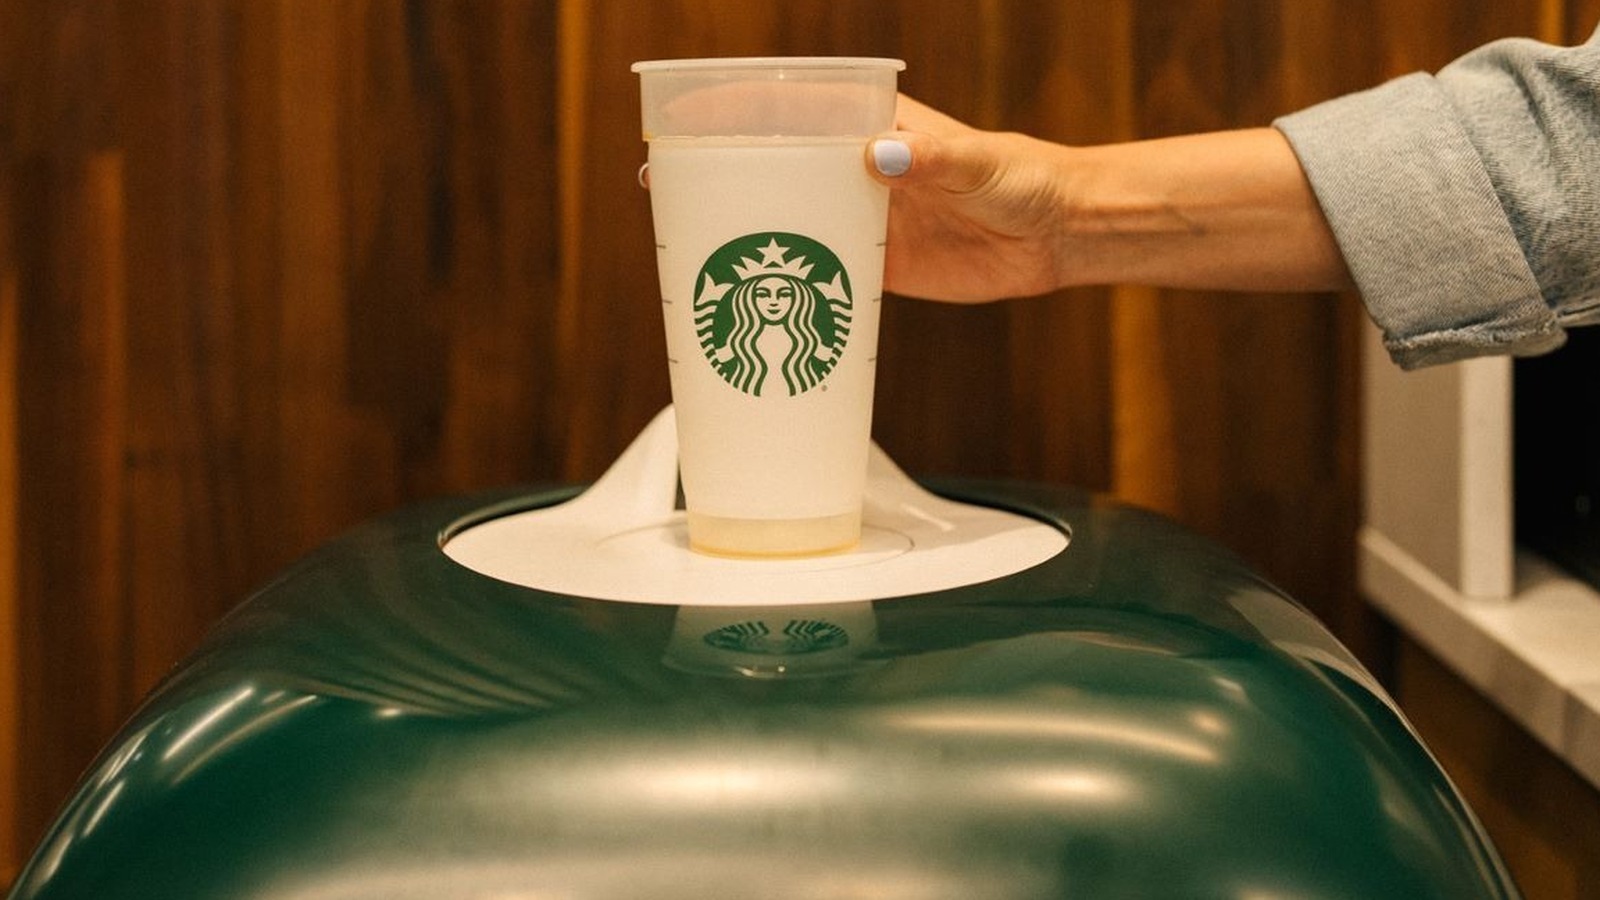 https://www.mashed.com/img/gallery/why-starbucks-may-not-offer-you-a-disposable-cup-on-your-next-coffee-run/l-intro-1692280082.jpg